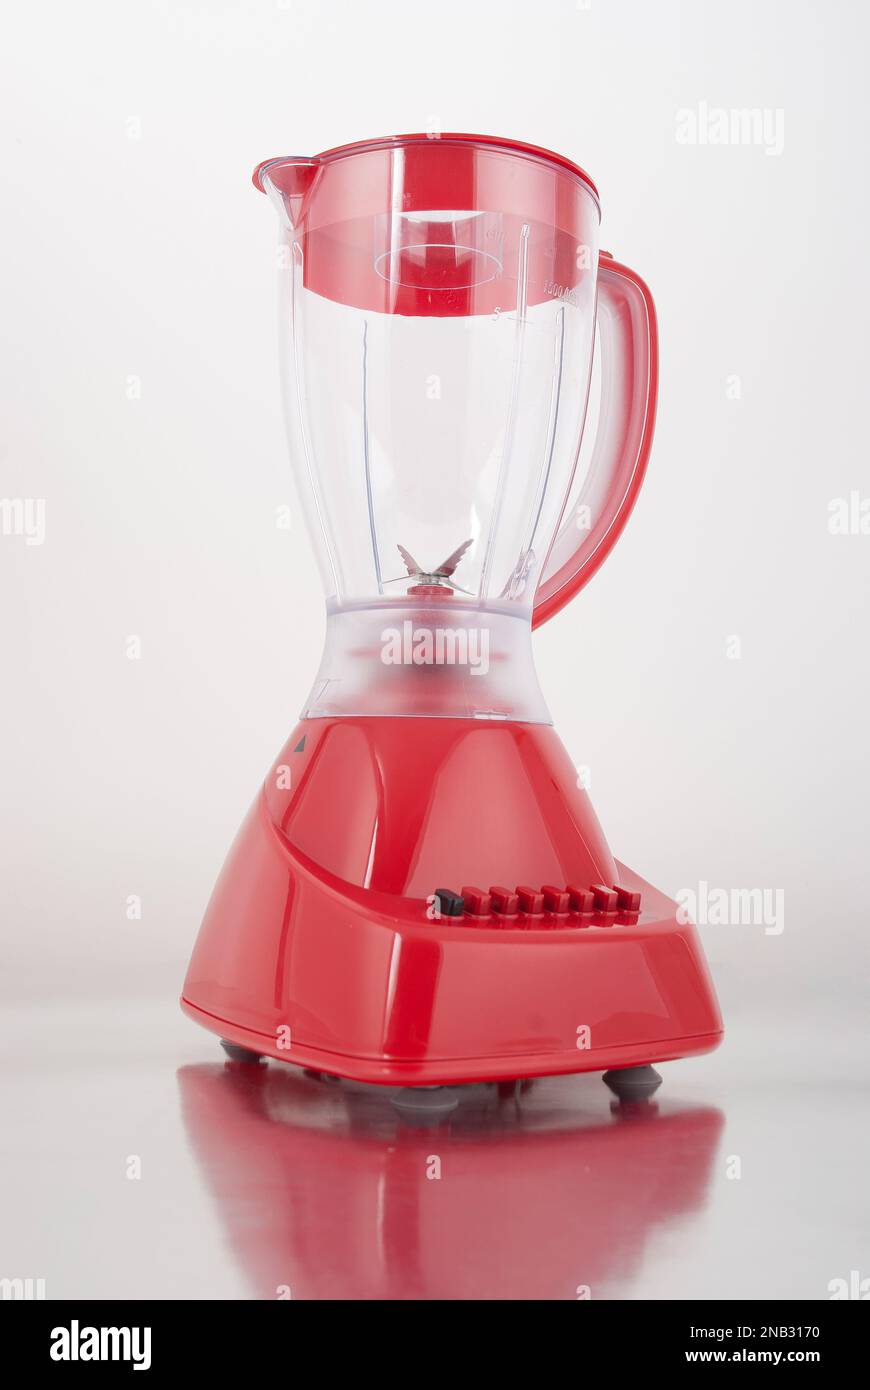 Household appliance - red electric blender. Stock Photo